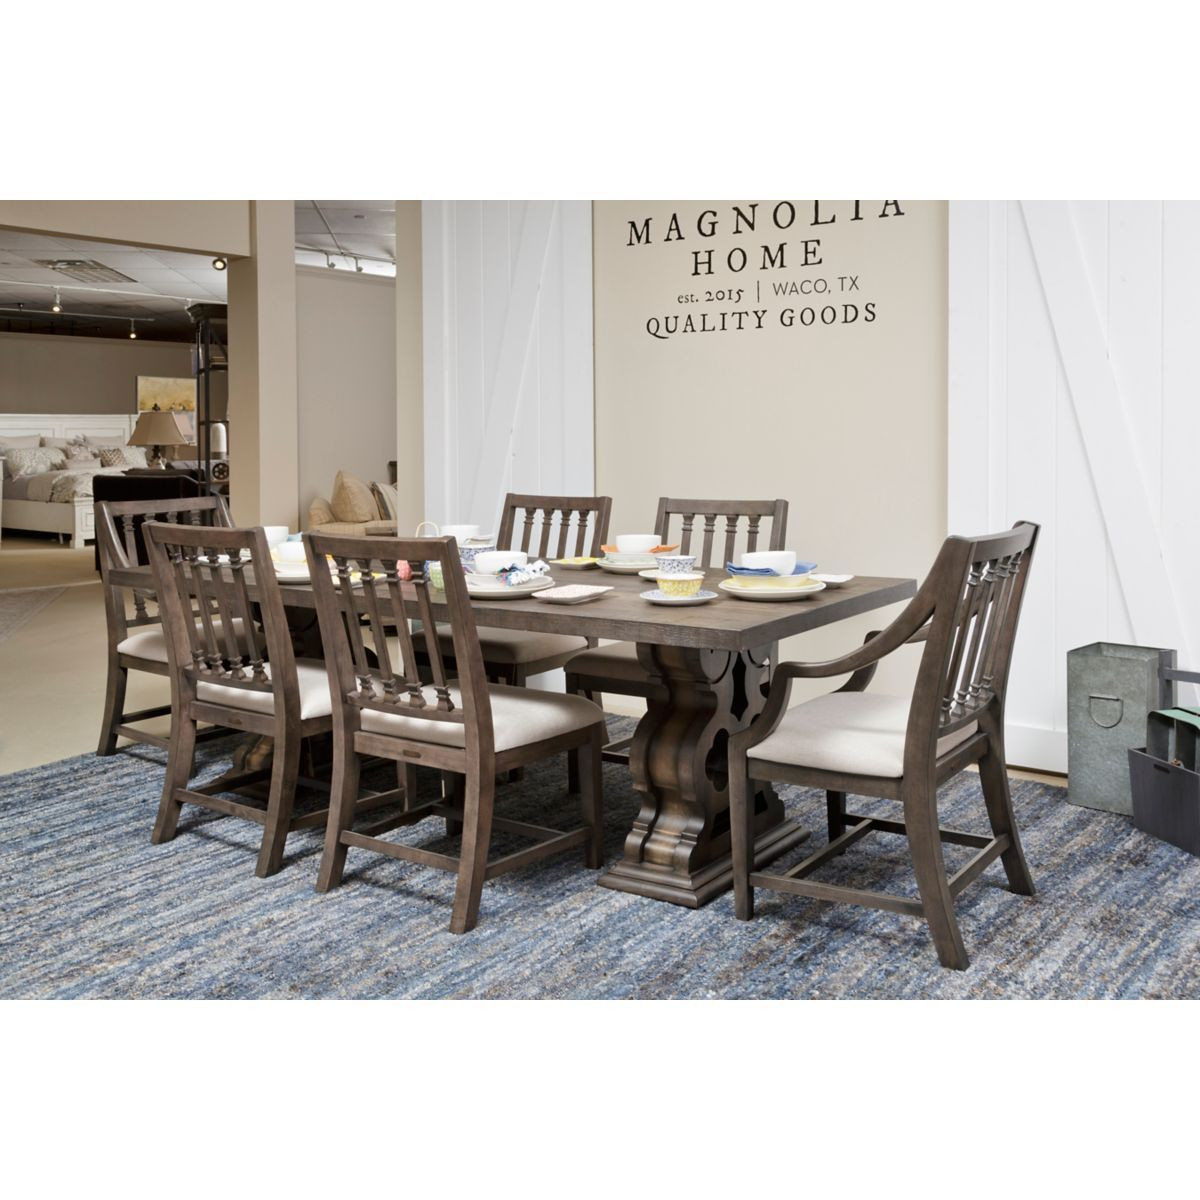 24 Popular Vase Turned Dining Table Magnolia 2024 free download vase turned dining table magnolia of another view from our showroom of the traditional double pedestal regarding another view from our showroom of the traditional double pedestal dining room